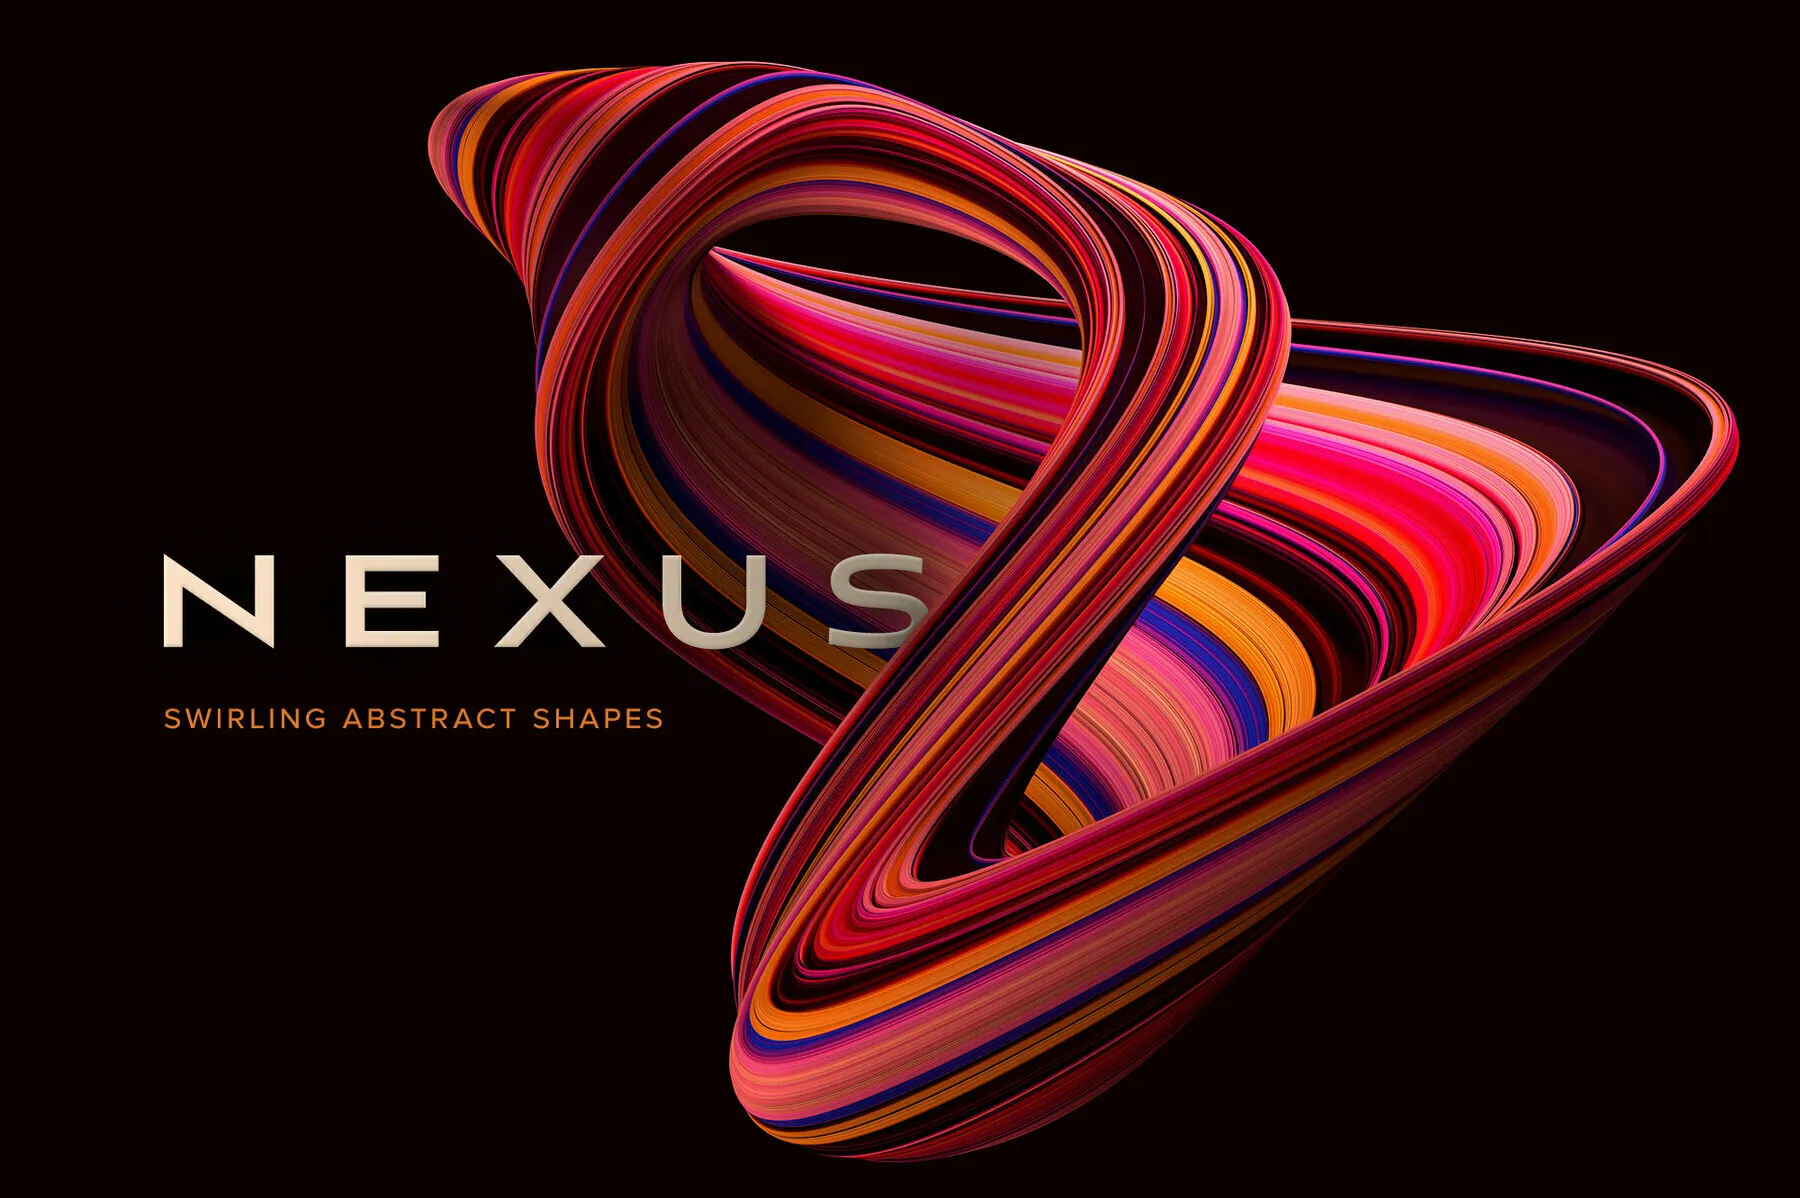 Nexus – Swirling Abstract Shapes